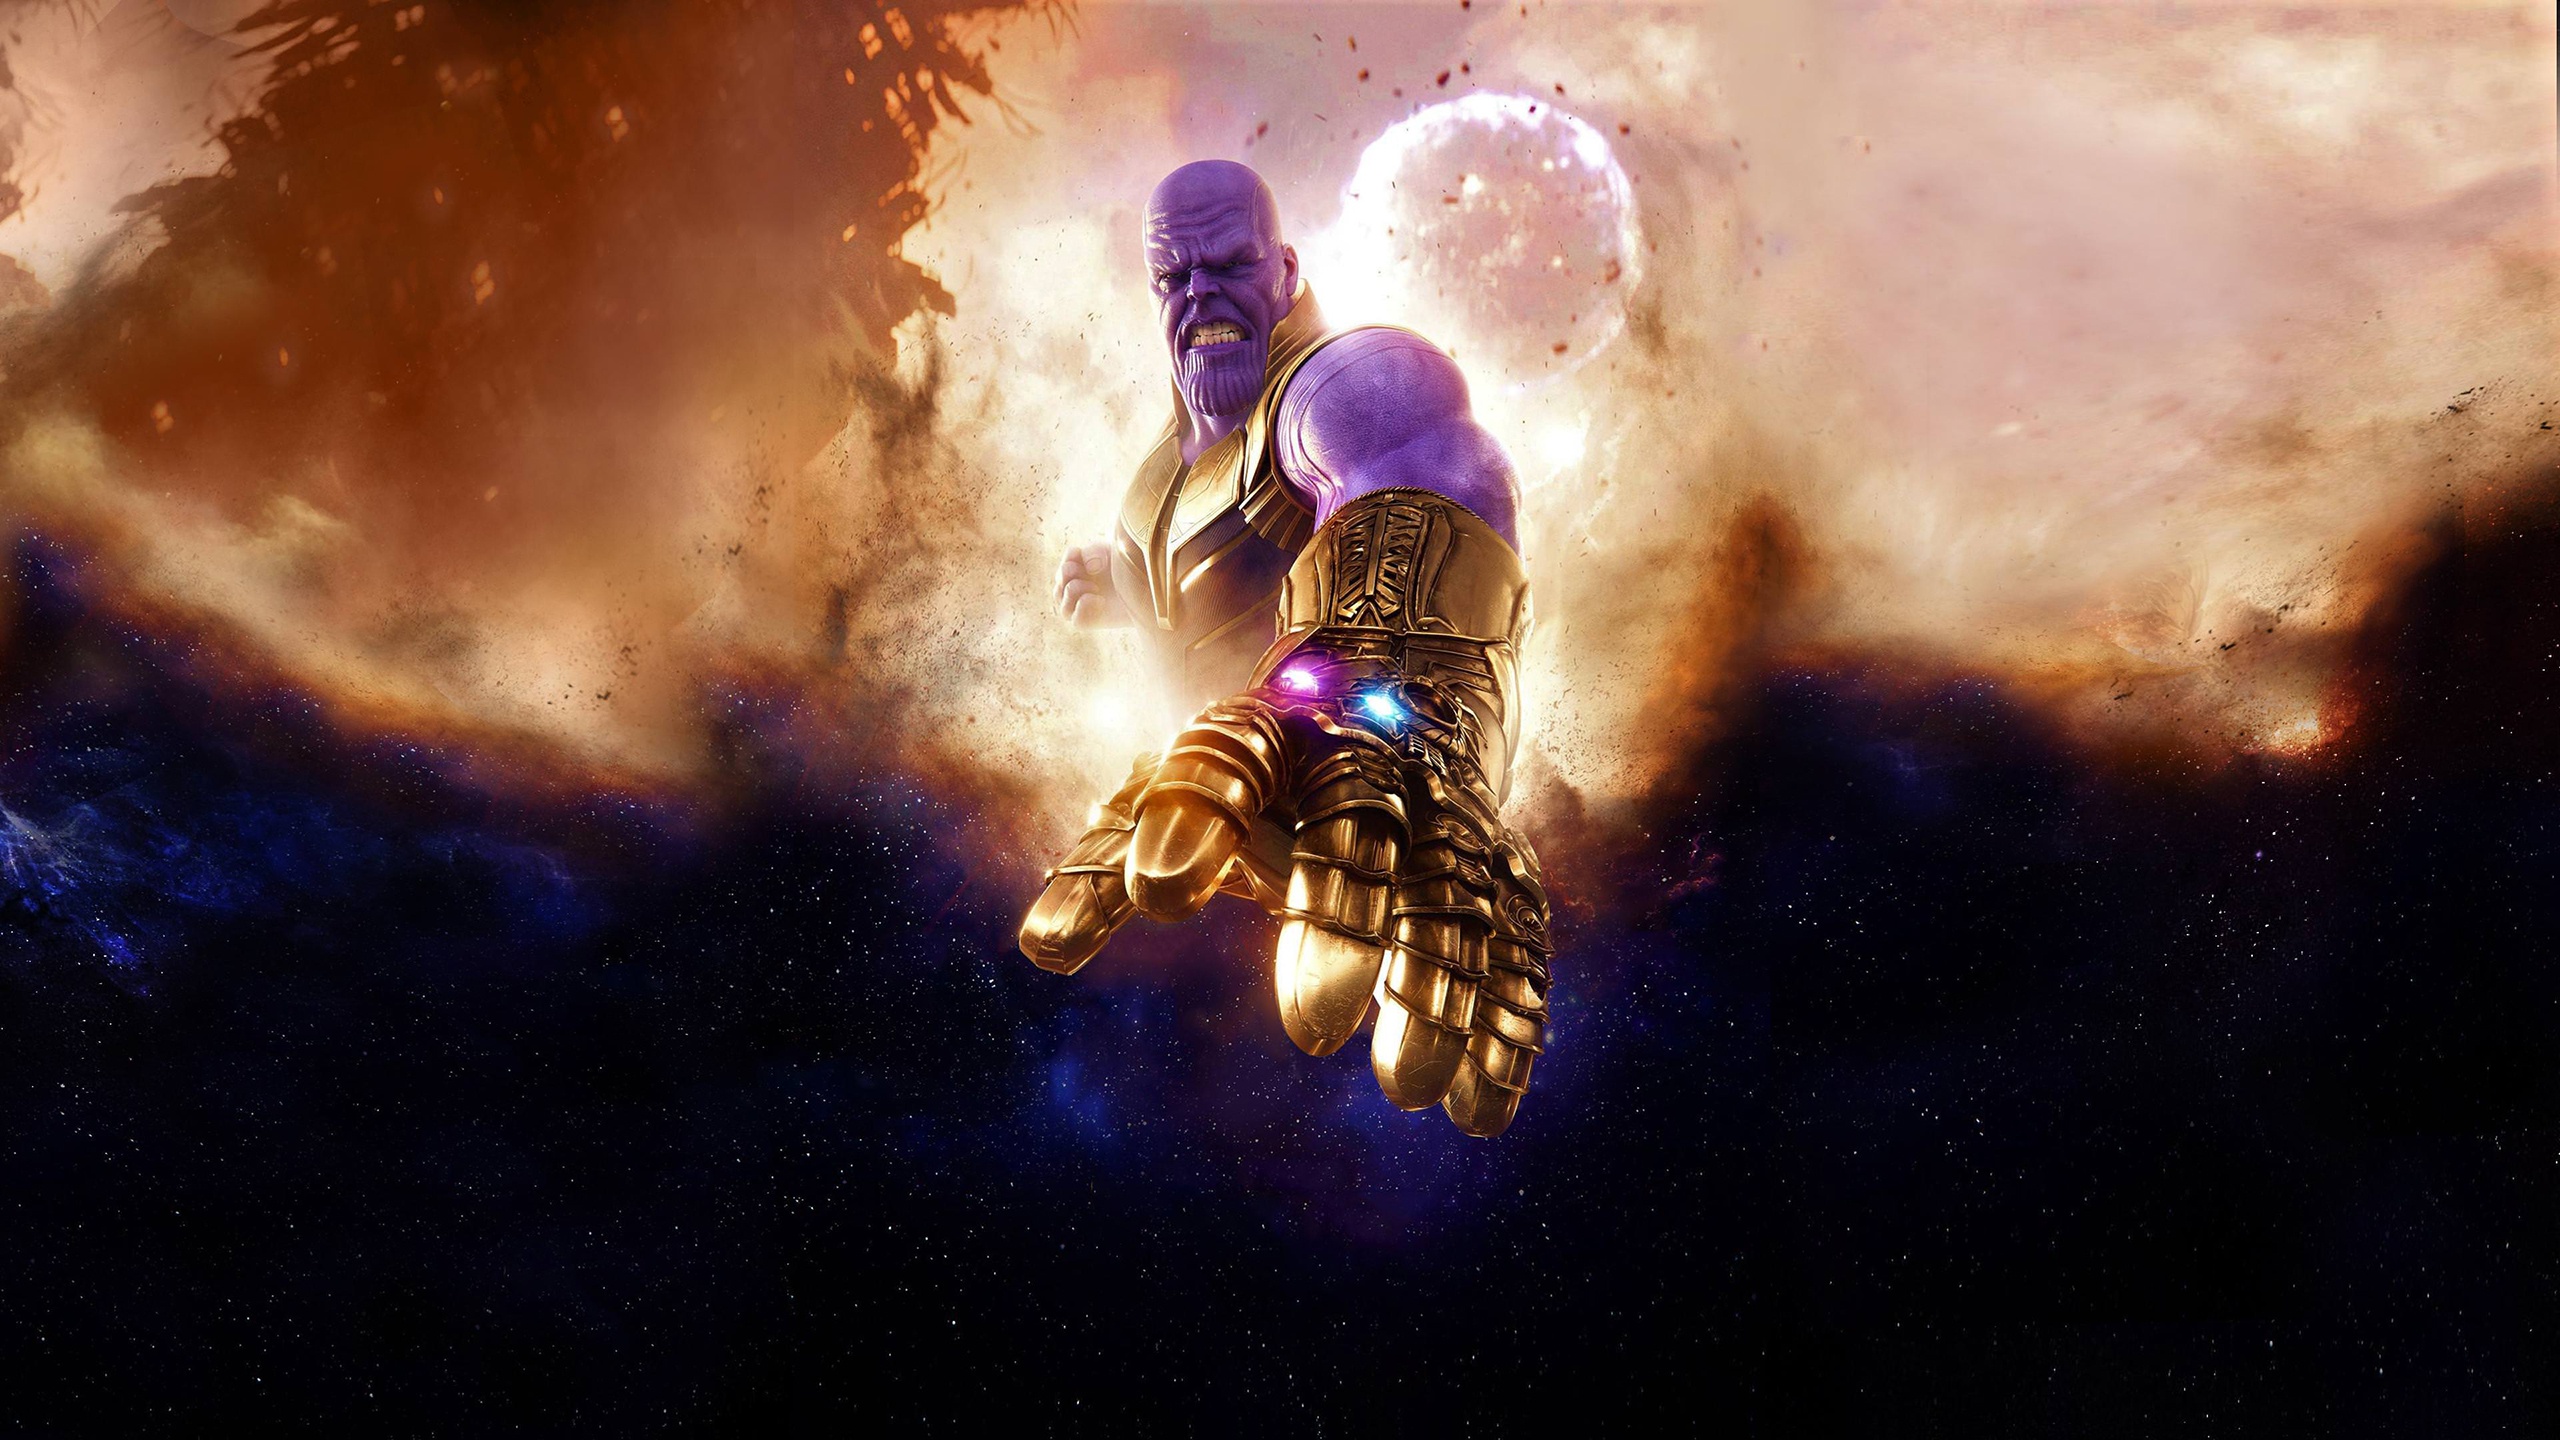 Free Thanos Wallpaper Downloads 100 Thanos Wallpapers for FREE   Wallpaperscom